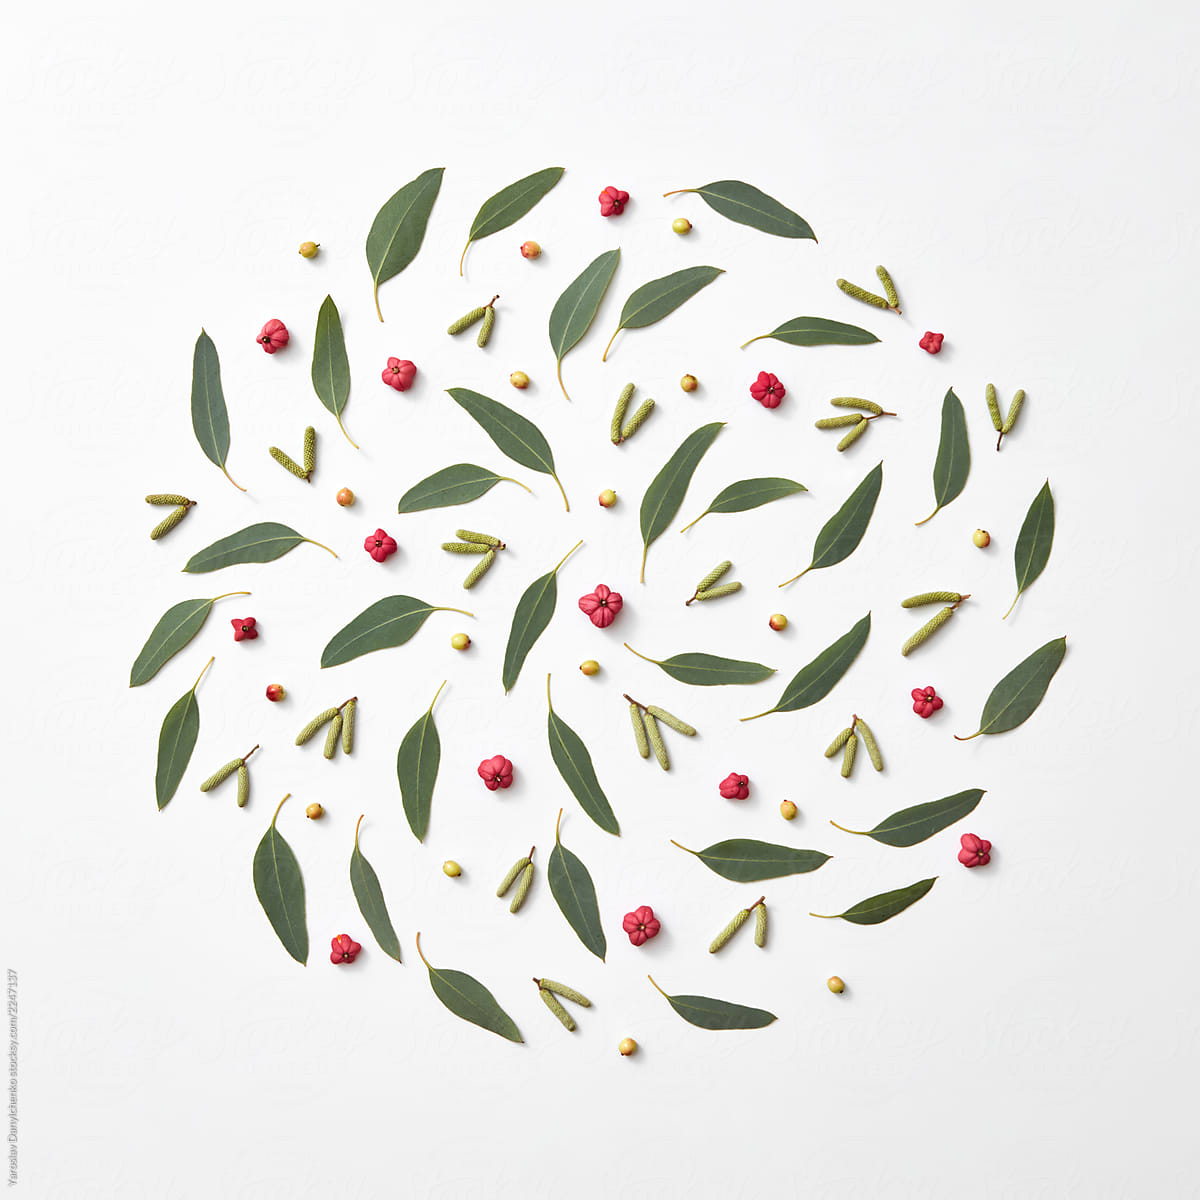 Natural pattern in the form of a circle of buds, berries and green leaves on a gray background with copy space. Natural layout. Flat lay